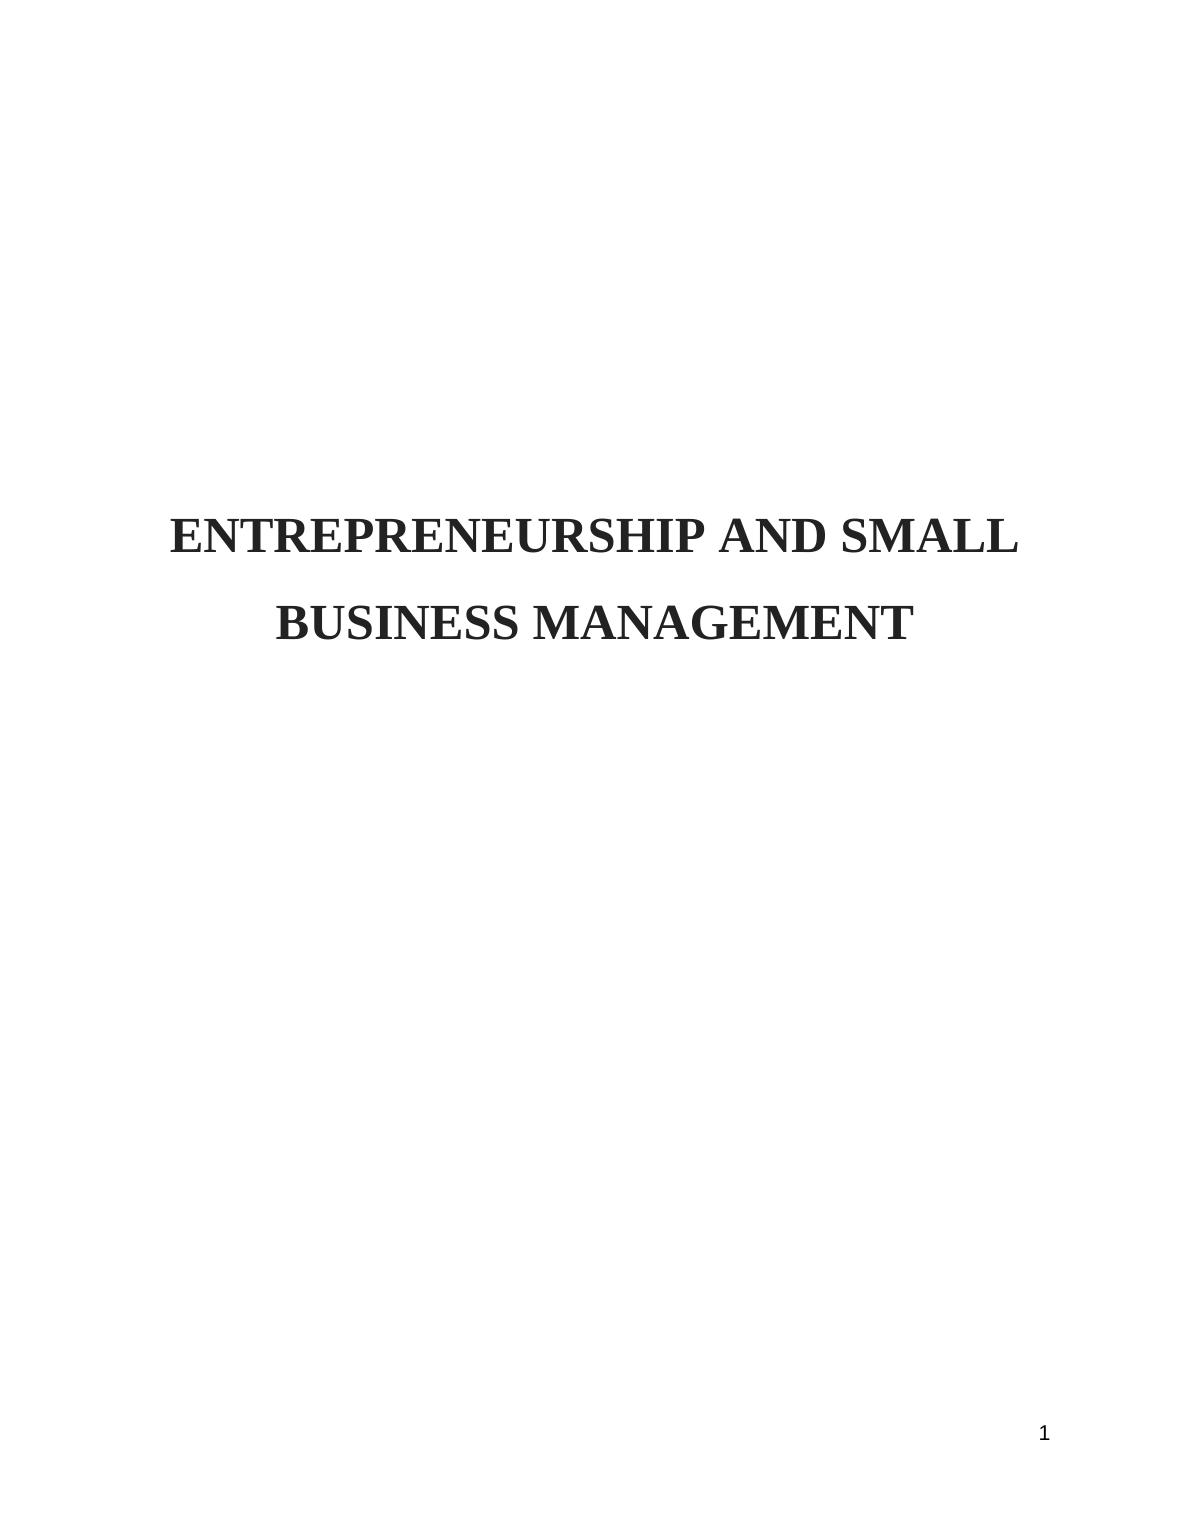 Exploring differences and similarities among entrepreneurial ventures and small business management initiatives_1